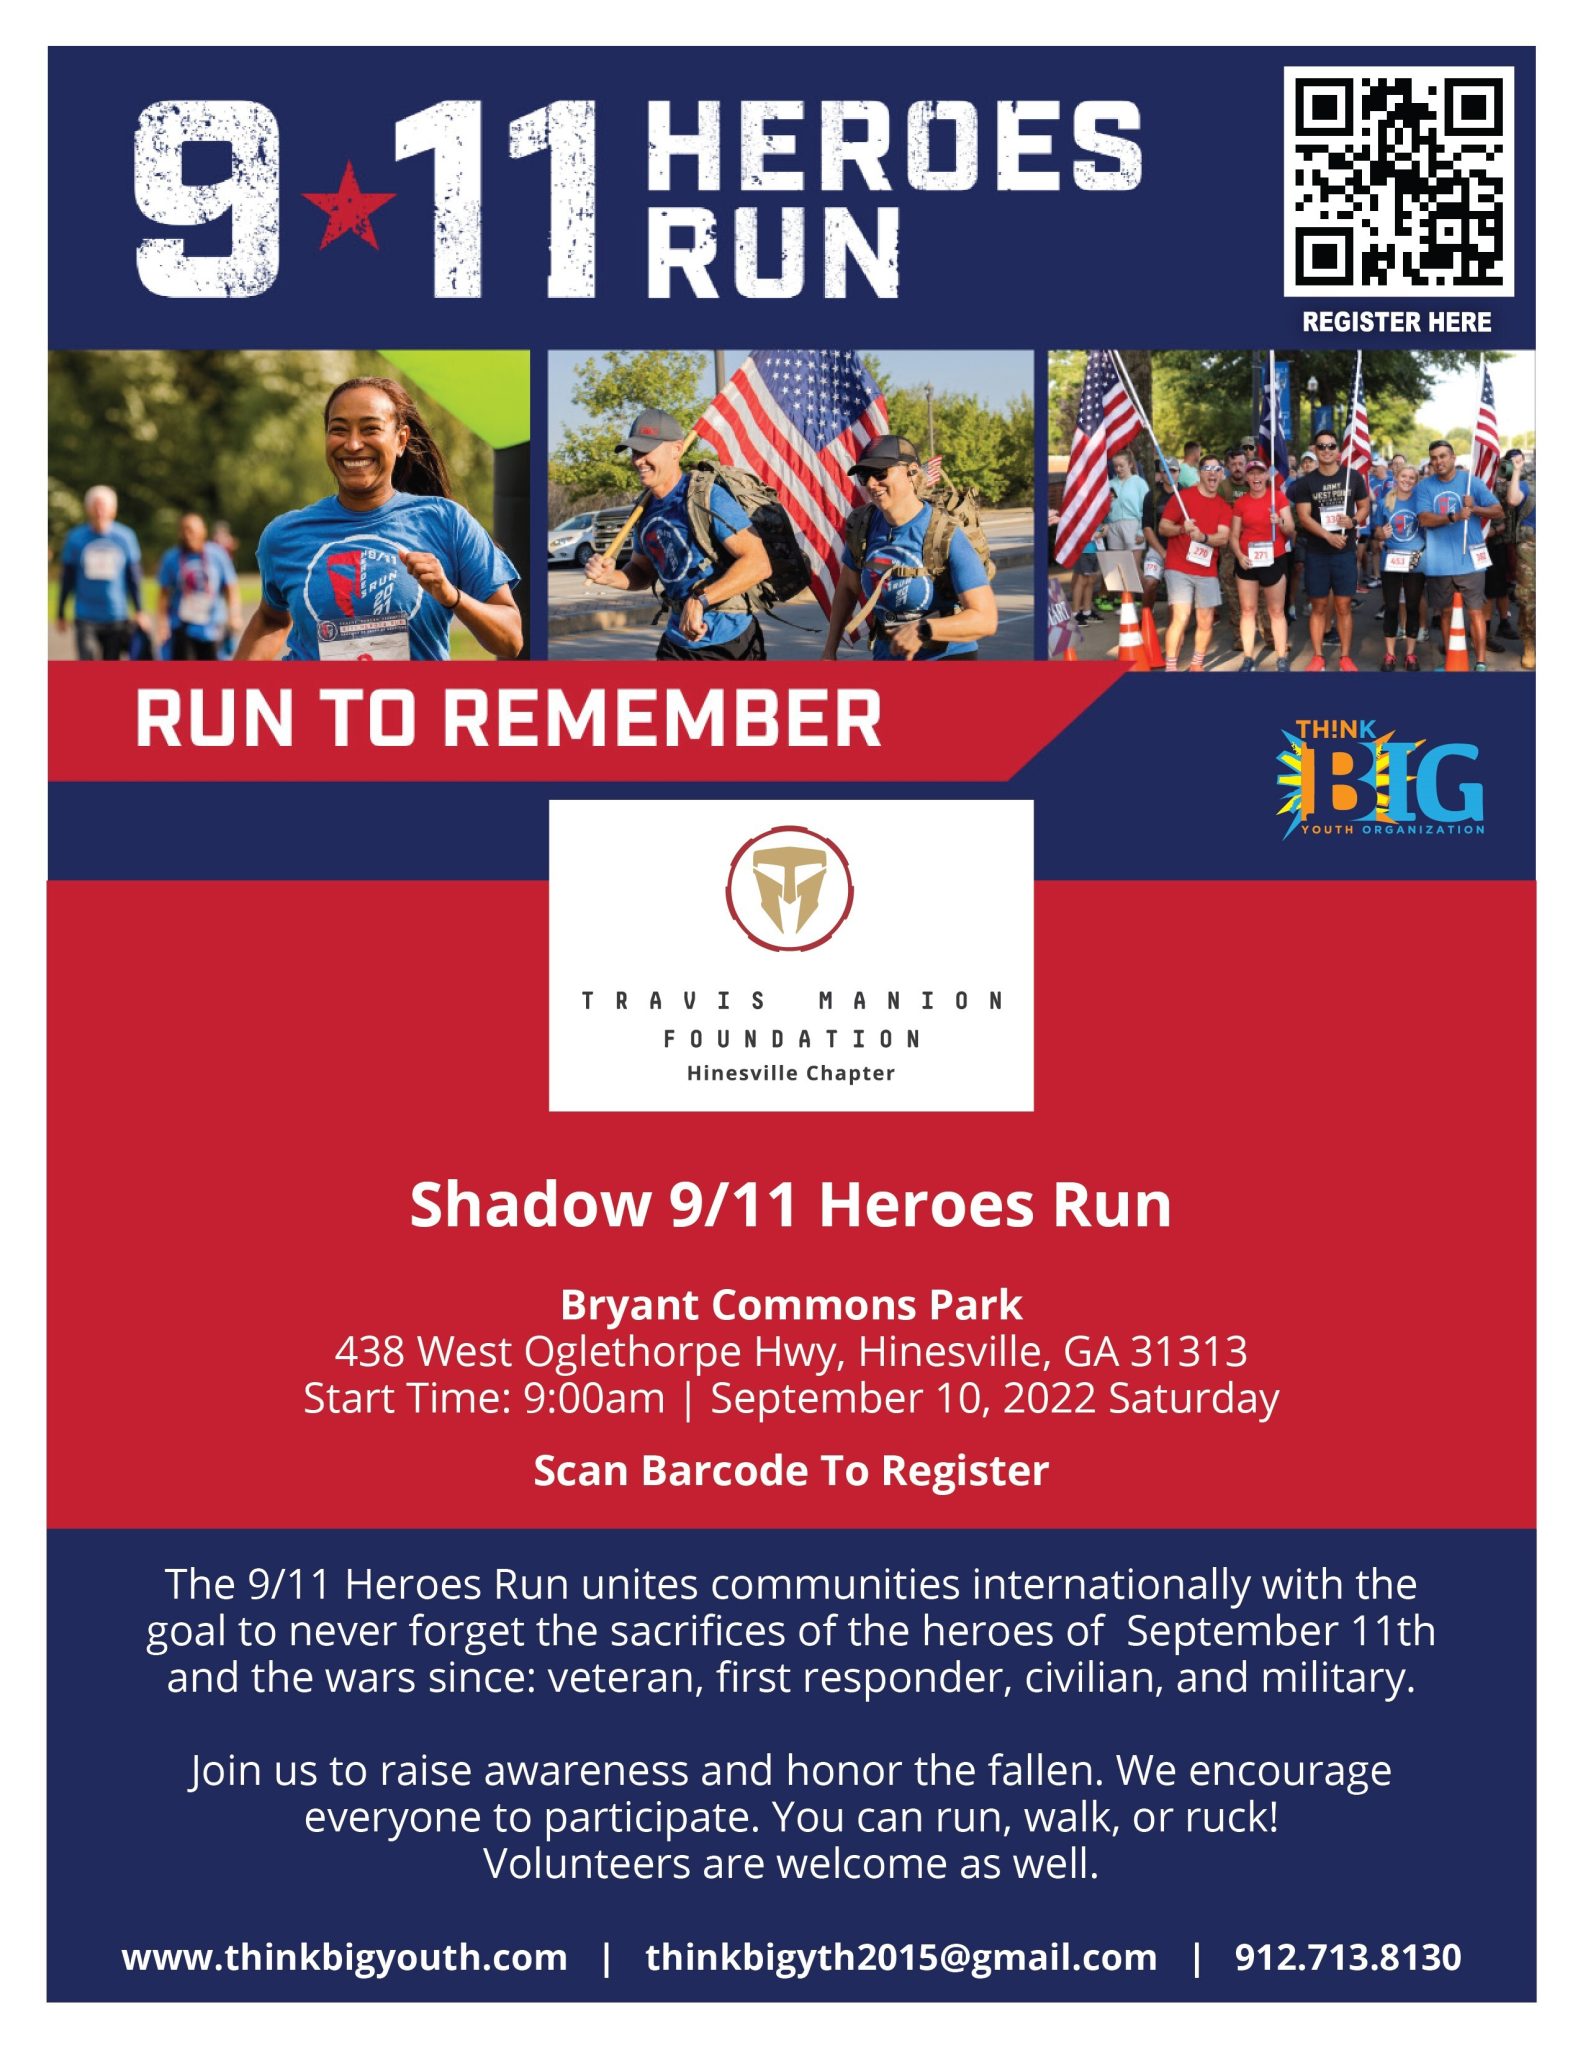 Flyer for 9/11 Heroes Run